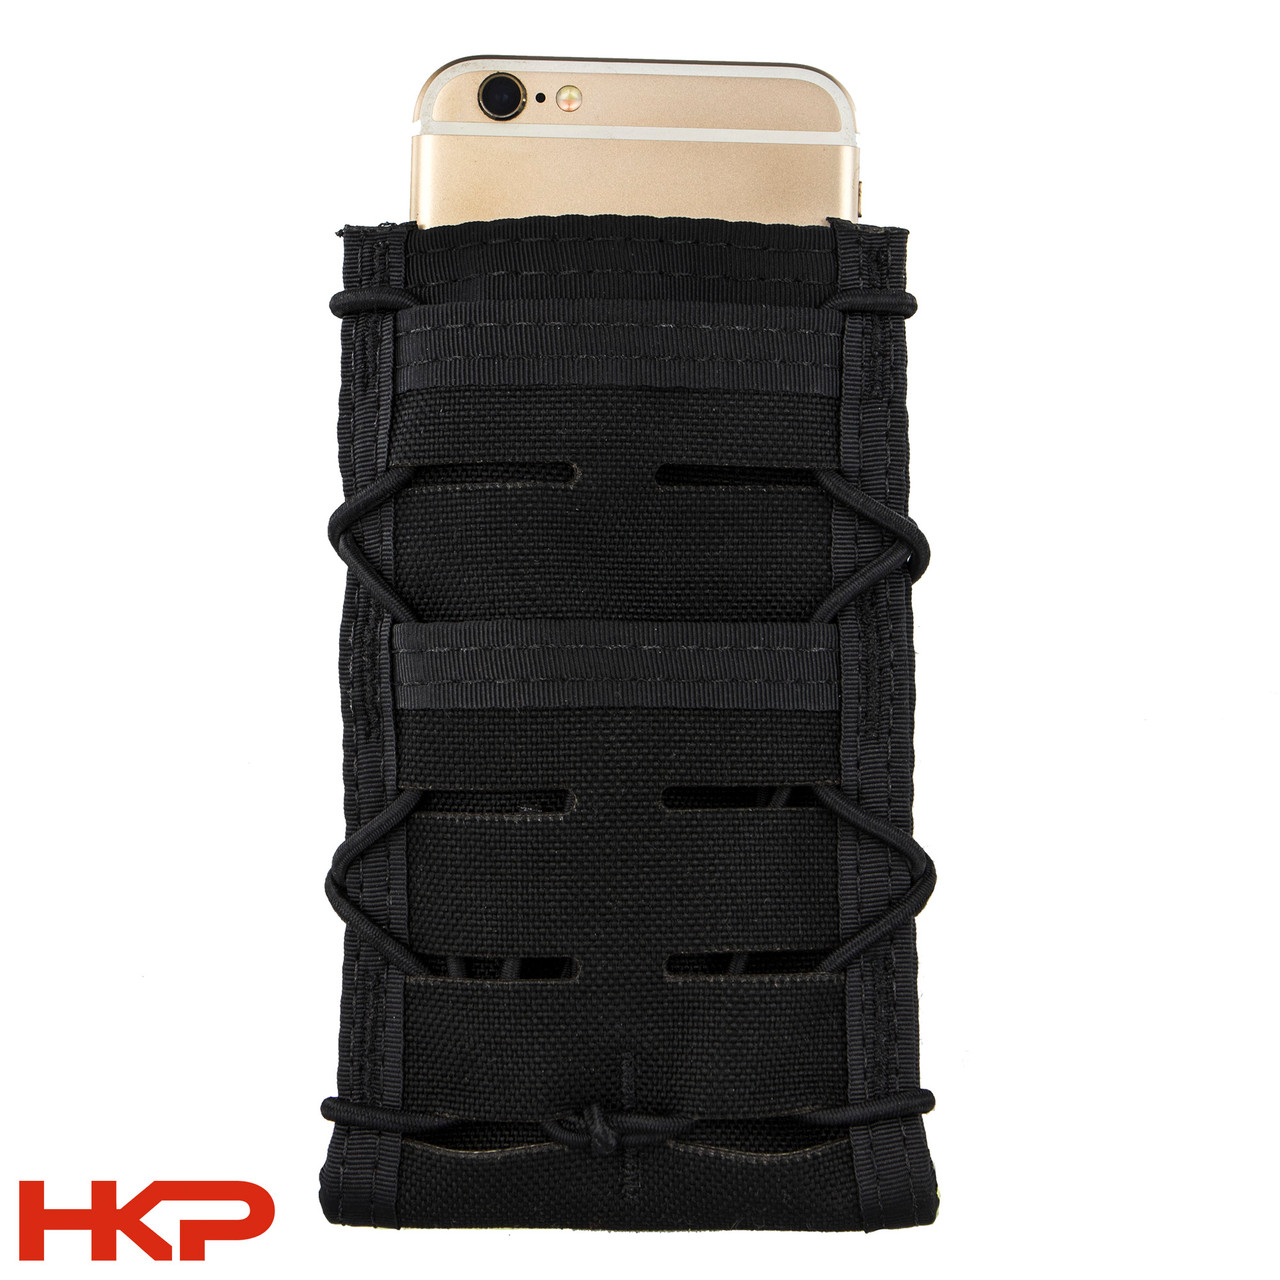 iTaco - Phone/Tech Pouch V2 - Black - Large